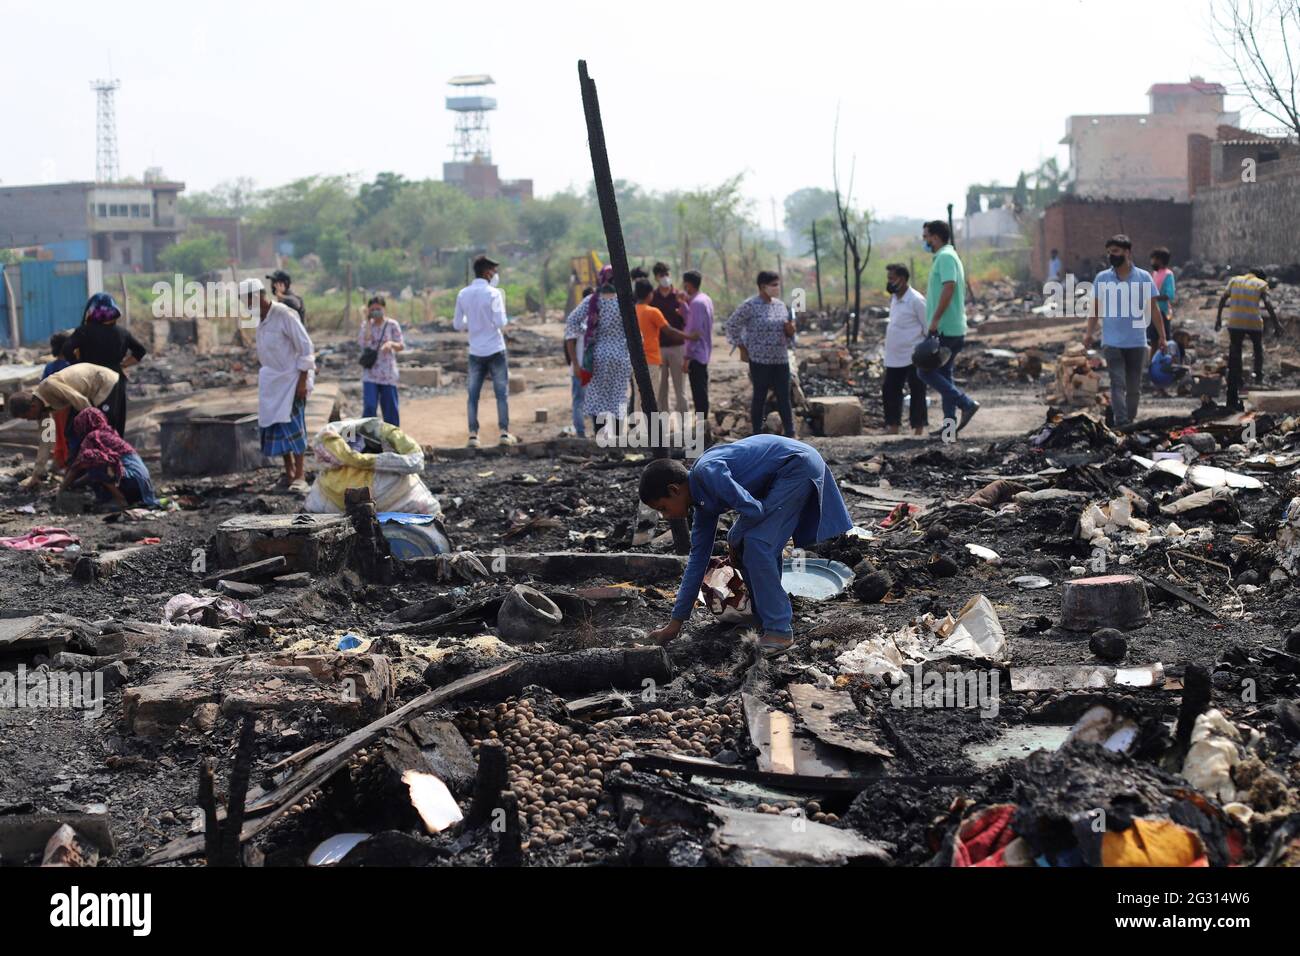 New Delhi, India. 13th June, 2021. Rohingya refugees look around the charred remains of their camp during the aftermath. A fire incident broke out at the Rohingya refugee camp leaving over 50 shanties of Rohingya refugees gutted. The cause of the fire has not yet been established. Credit: SOPA Images Limited/Alamy Live News Stock Photo